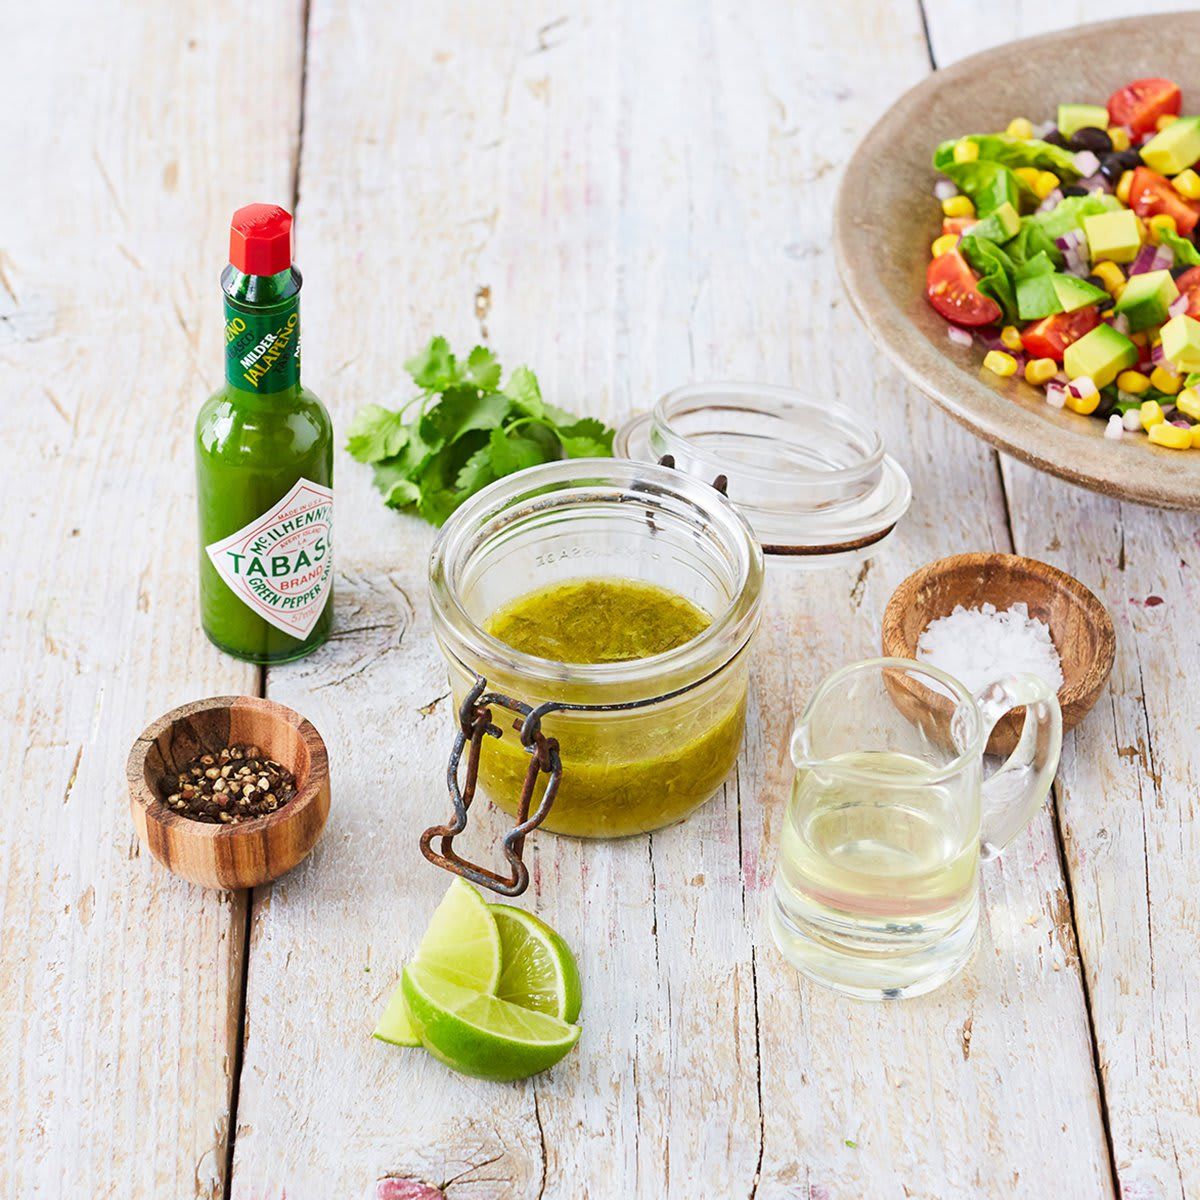 Black Bean Salad with Lime Zing Dressing from TABASCO